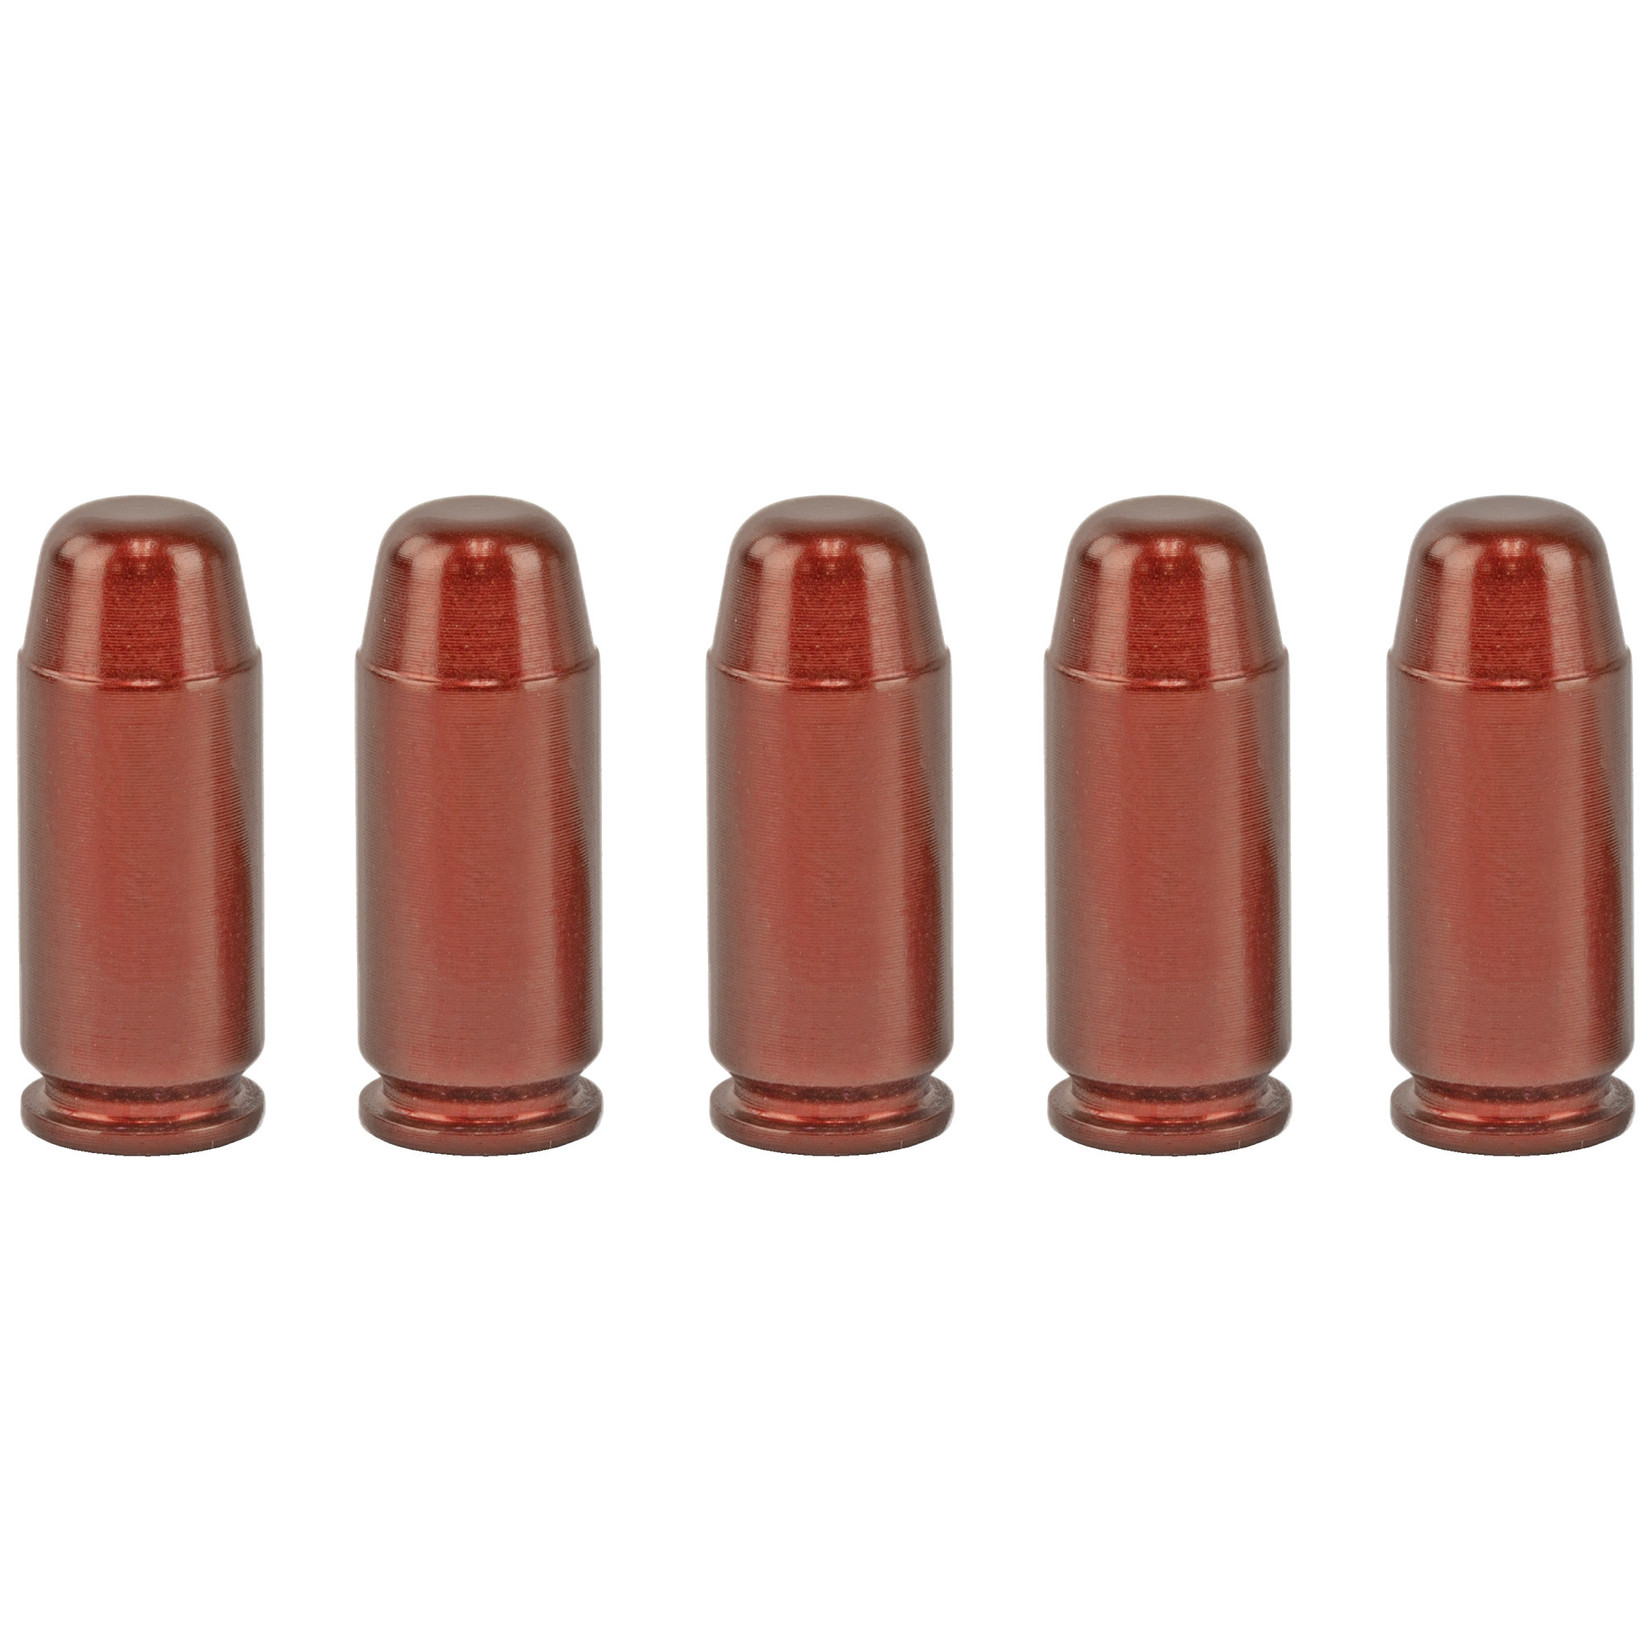 A-ZOOM A-Zoom, Snap Caps, 40 S&W, 5 Pack